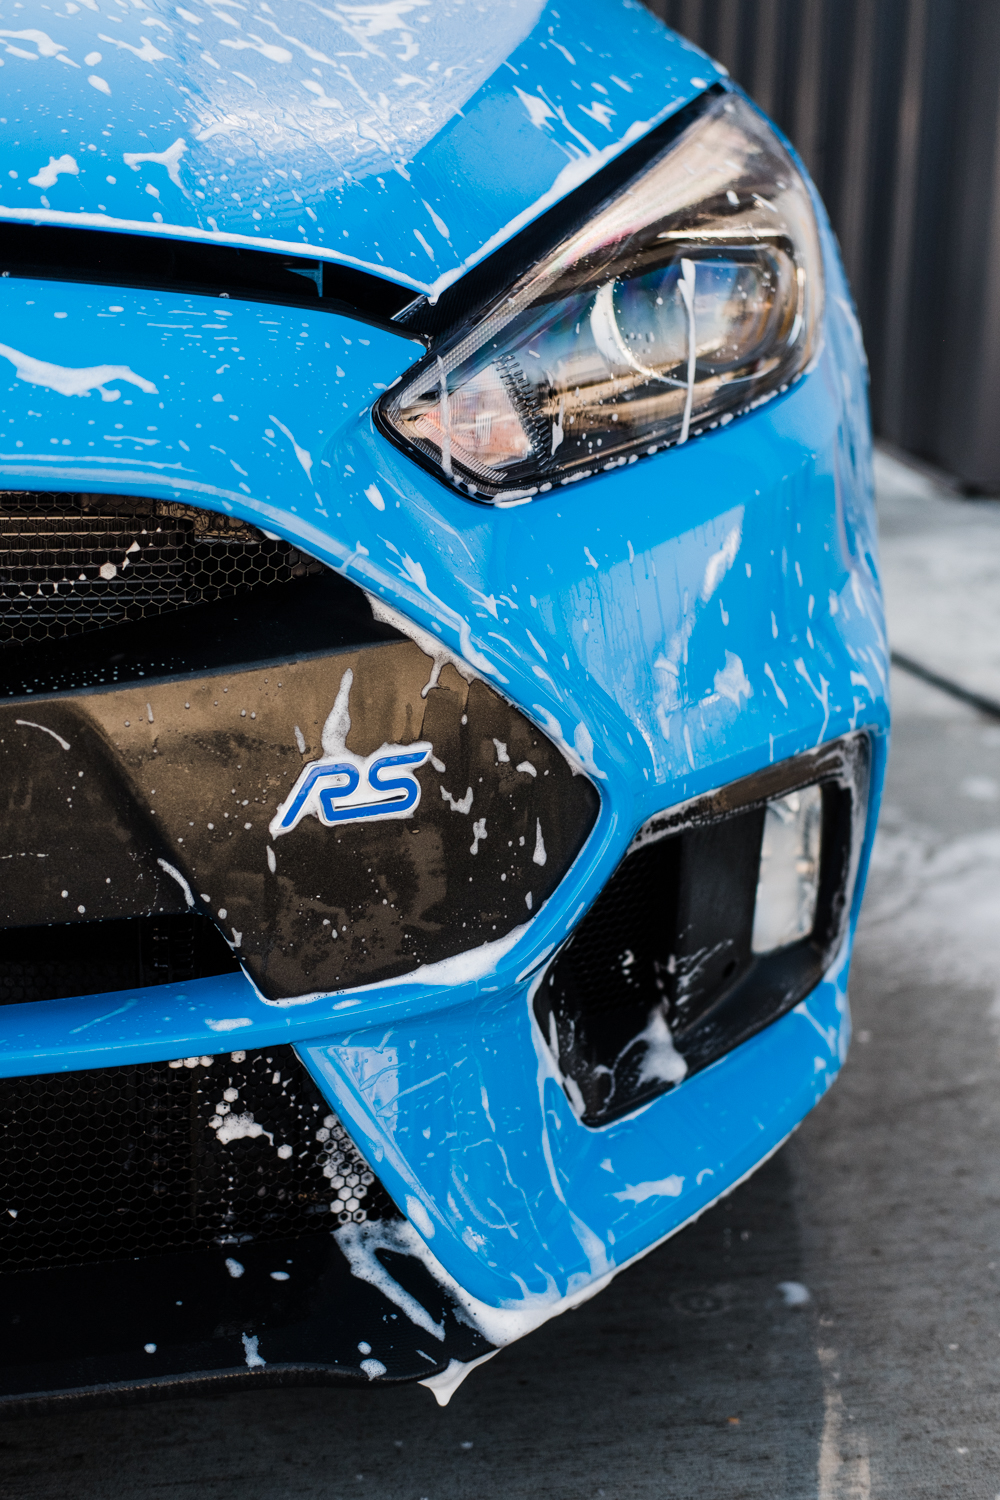 Ford Focus RS-XPEL Ultimate Paint Protection Film-Car Wash-Car Detailing-Paint Protection Film-Clear Bra-Ford Performance-110.jpg